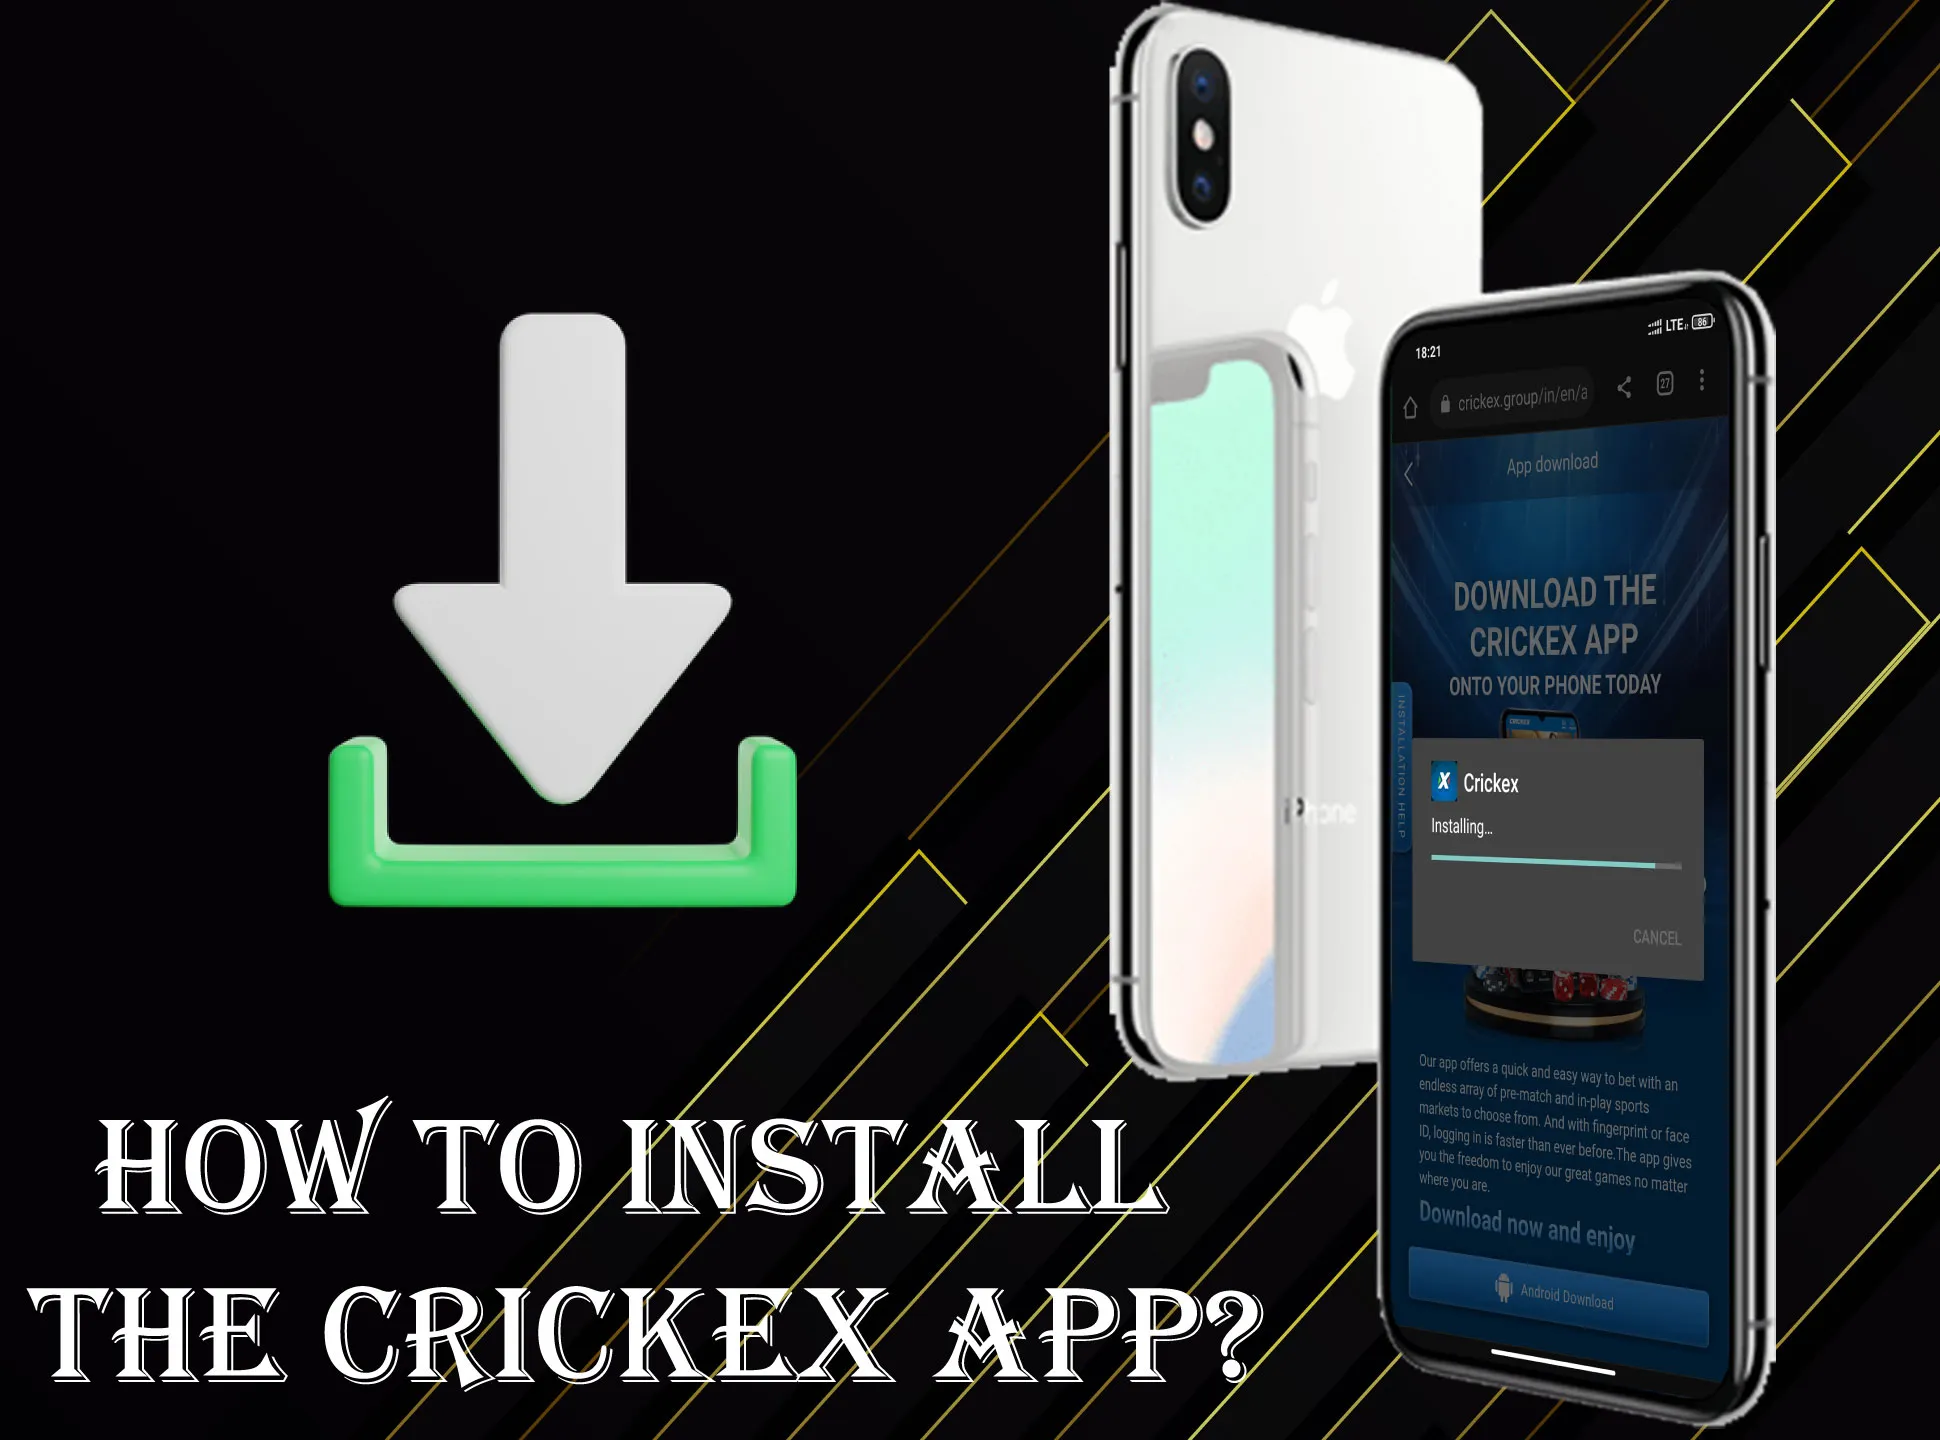 Here you learn how to install the app on the iOS device.